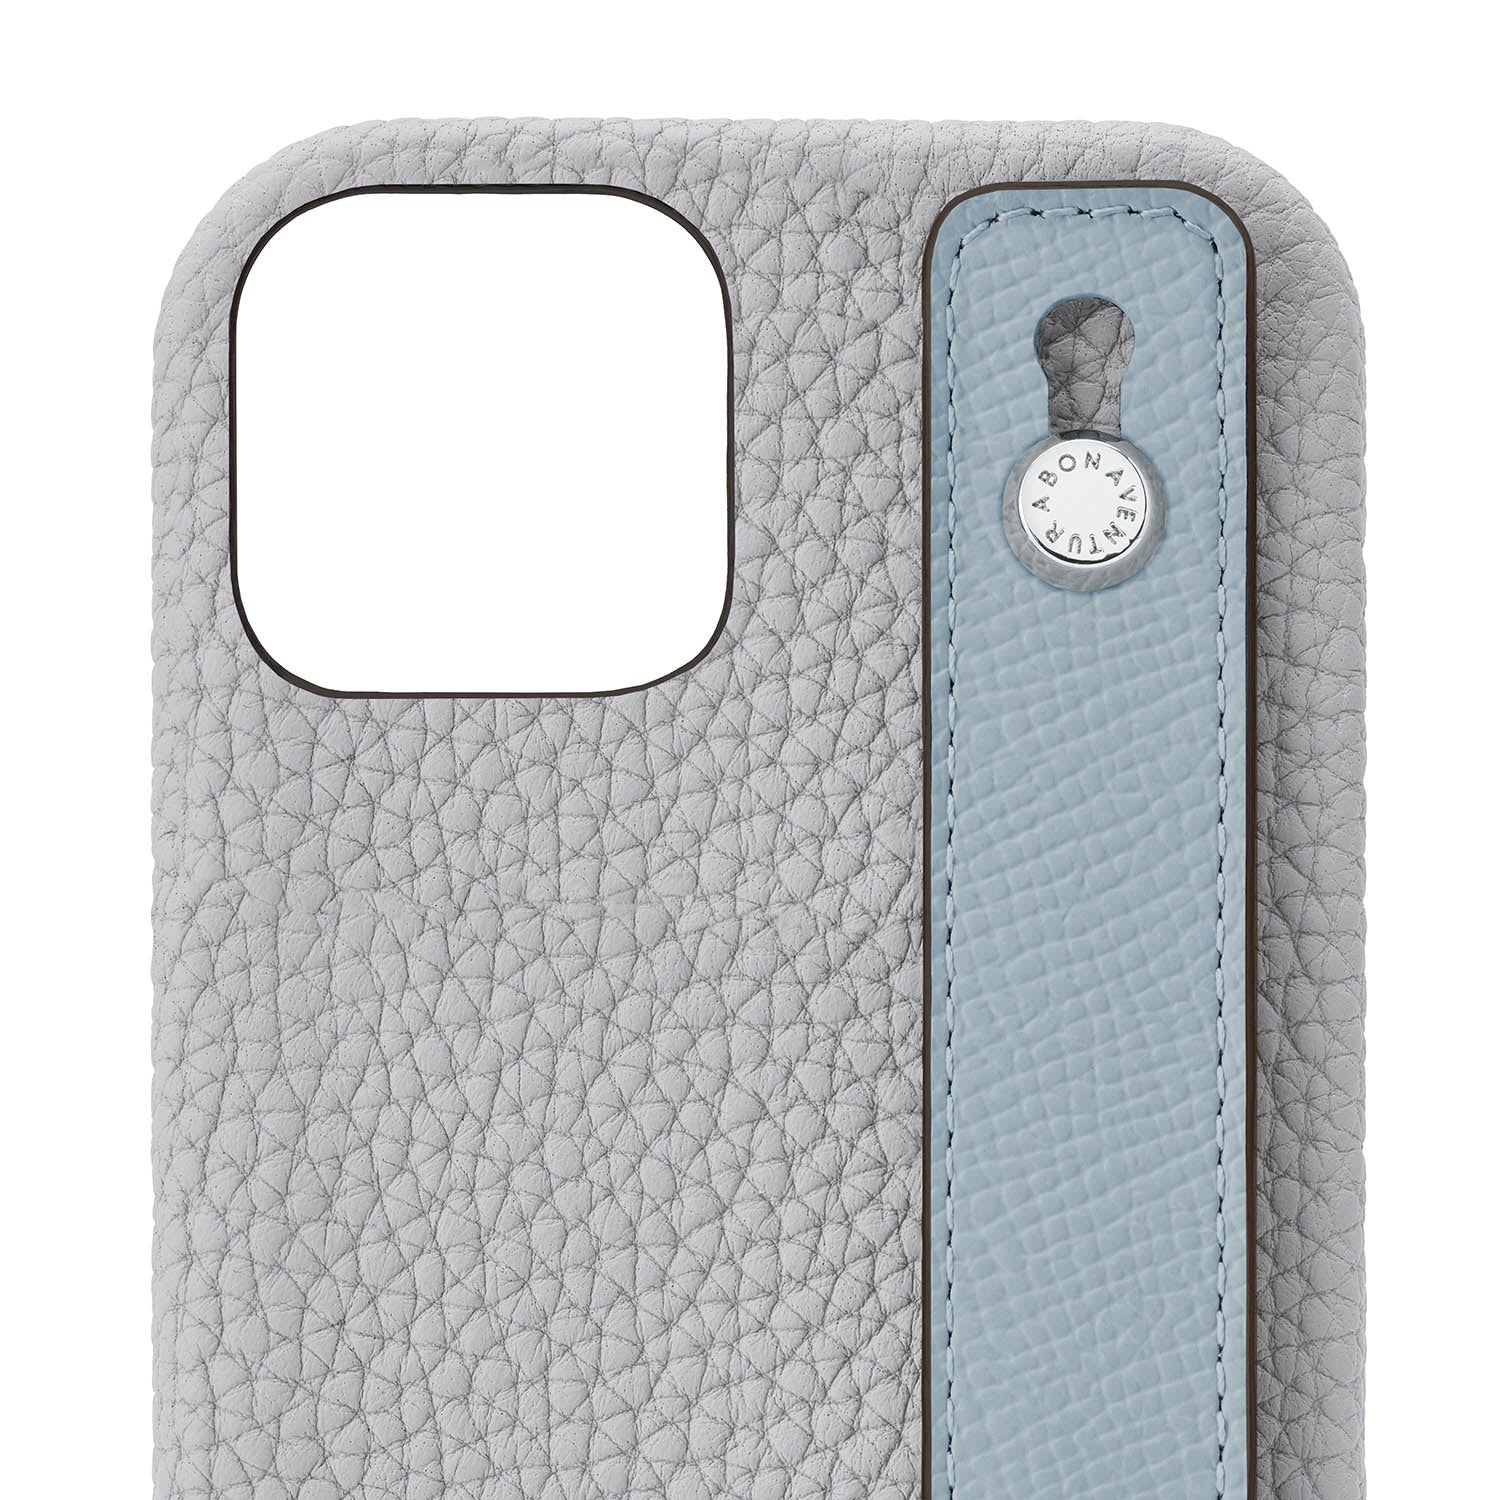 (iPhone 13) Back cover case with handle, shrink leather